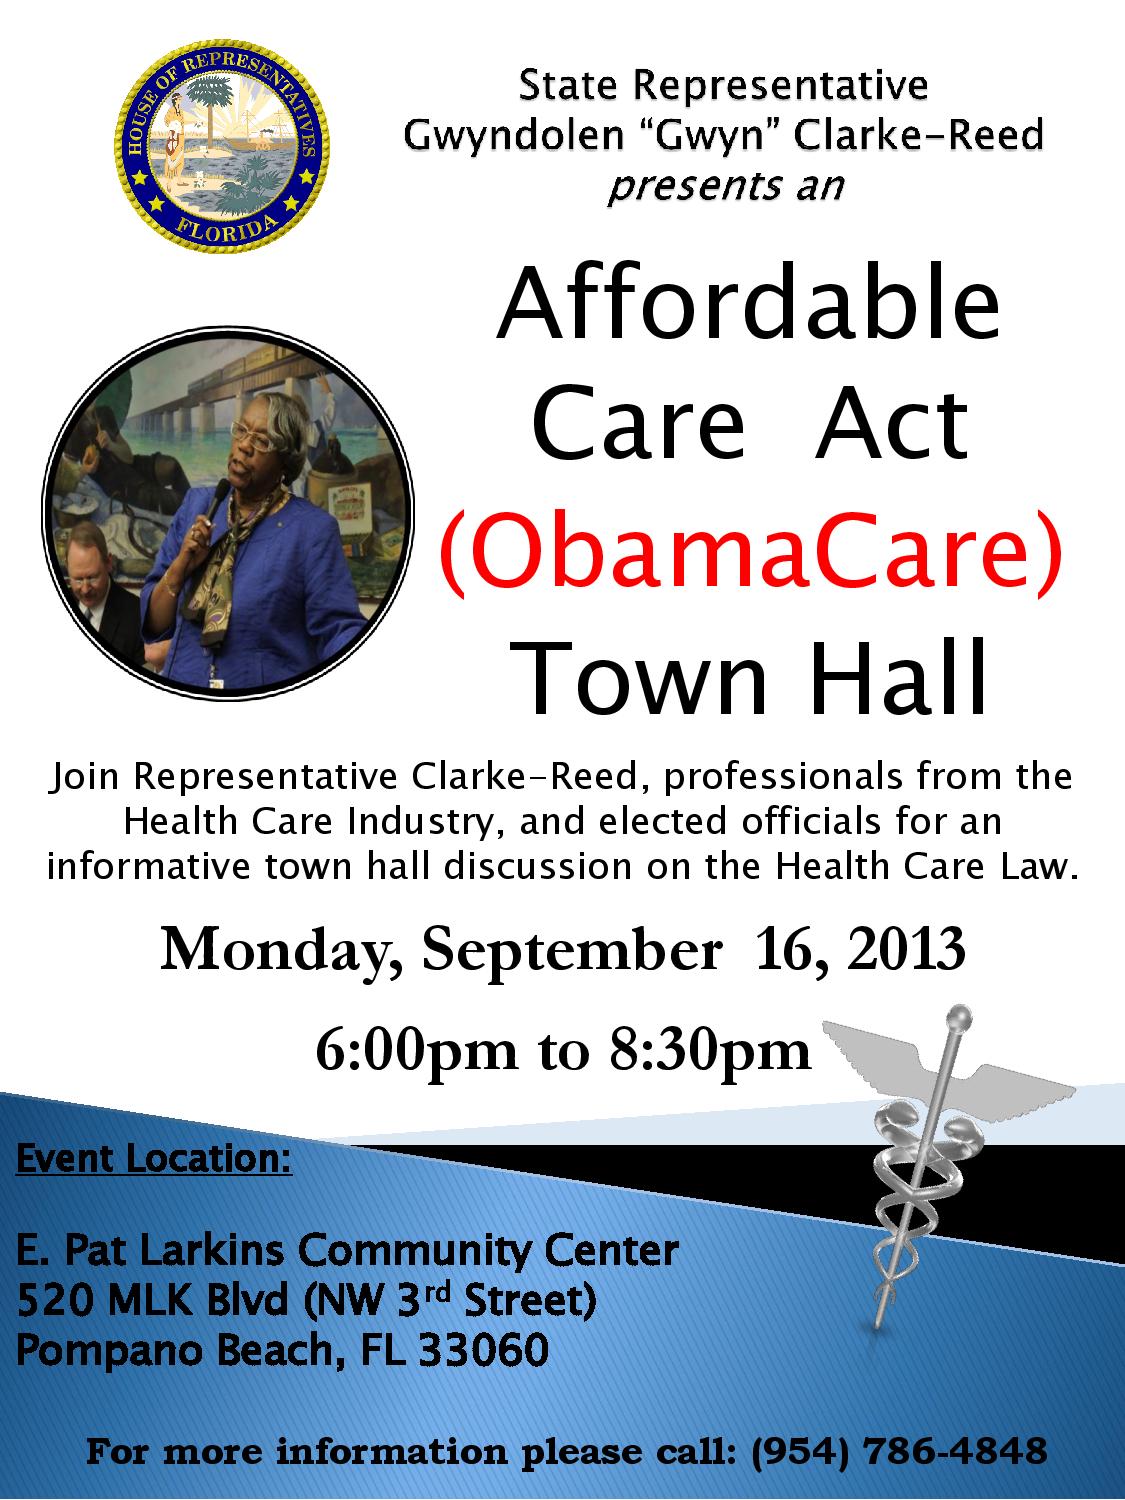 Affordable Care Act (ObamaCare) Town Hall - The Westside Gazette1125 x 1500